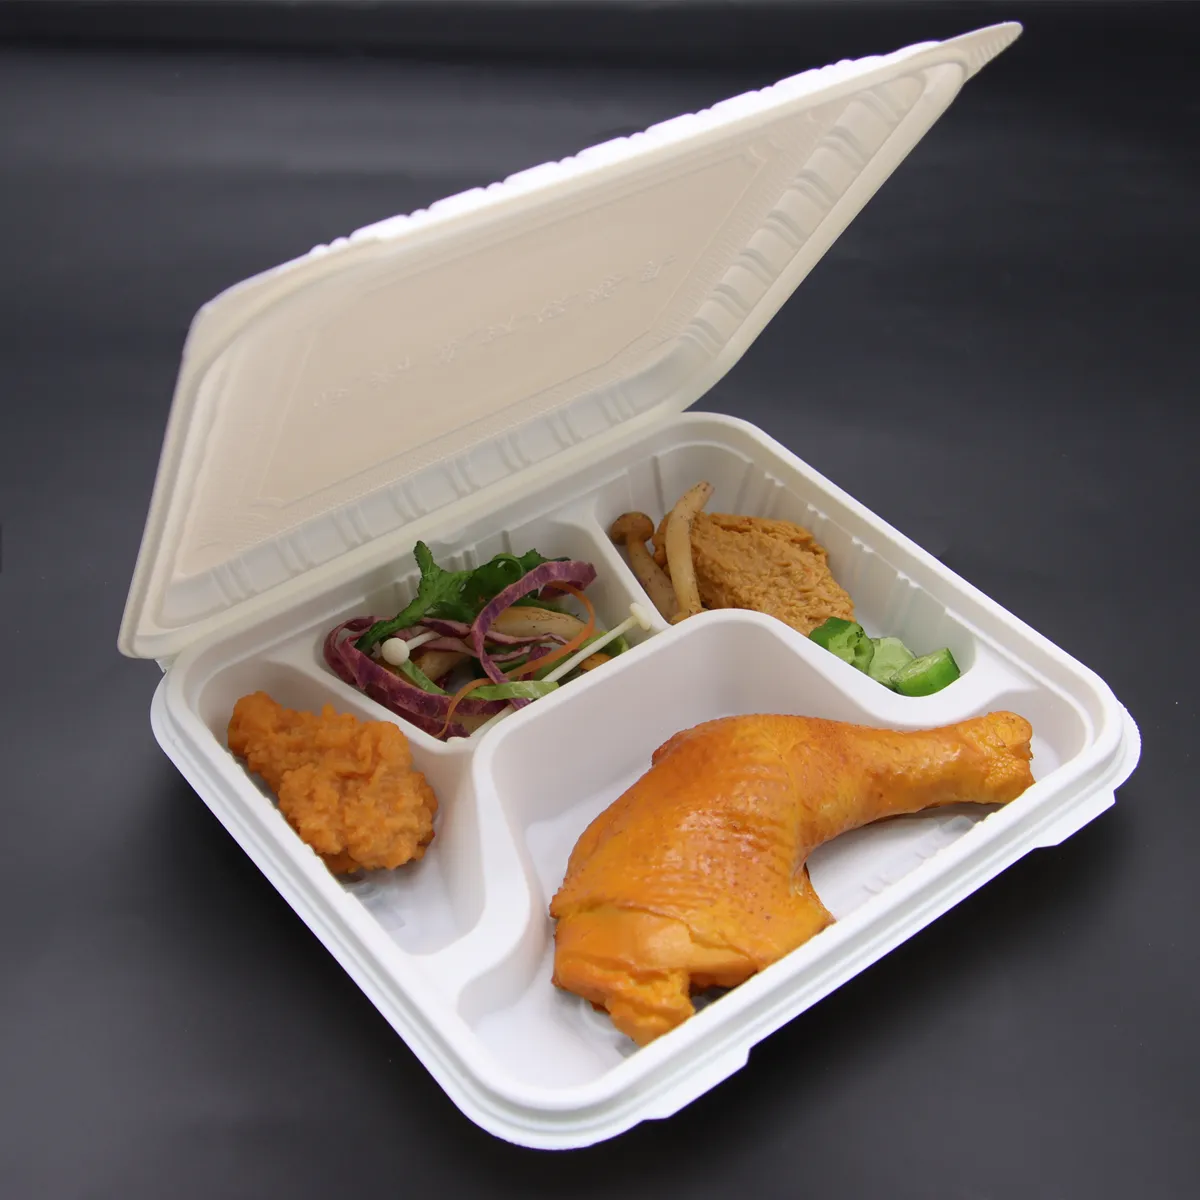 Biodegradable Takeaway Container Biodegradable Cornstarch Takeaway Food Container Lunch Box Take Away Food Containers